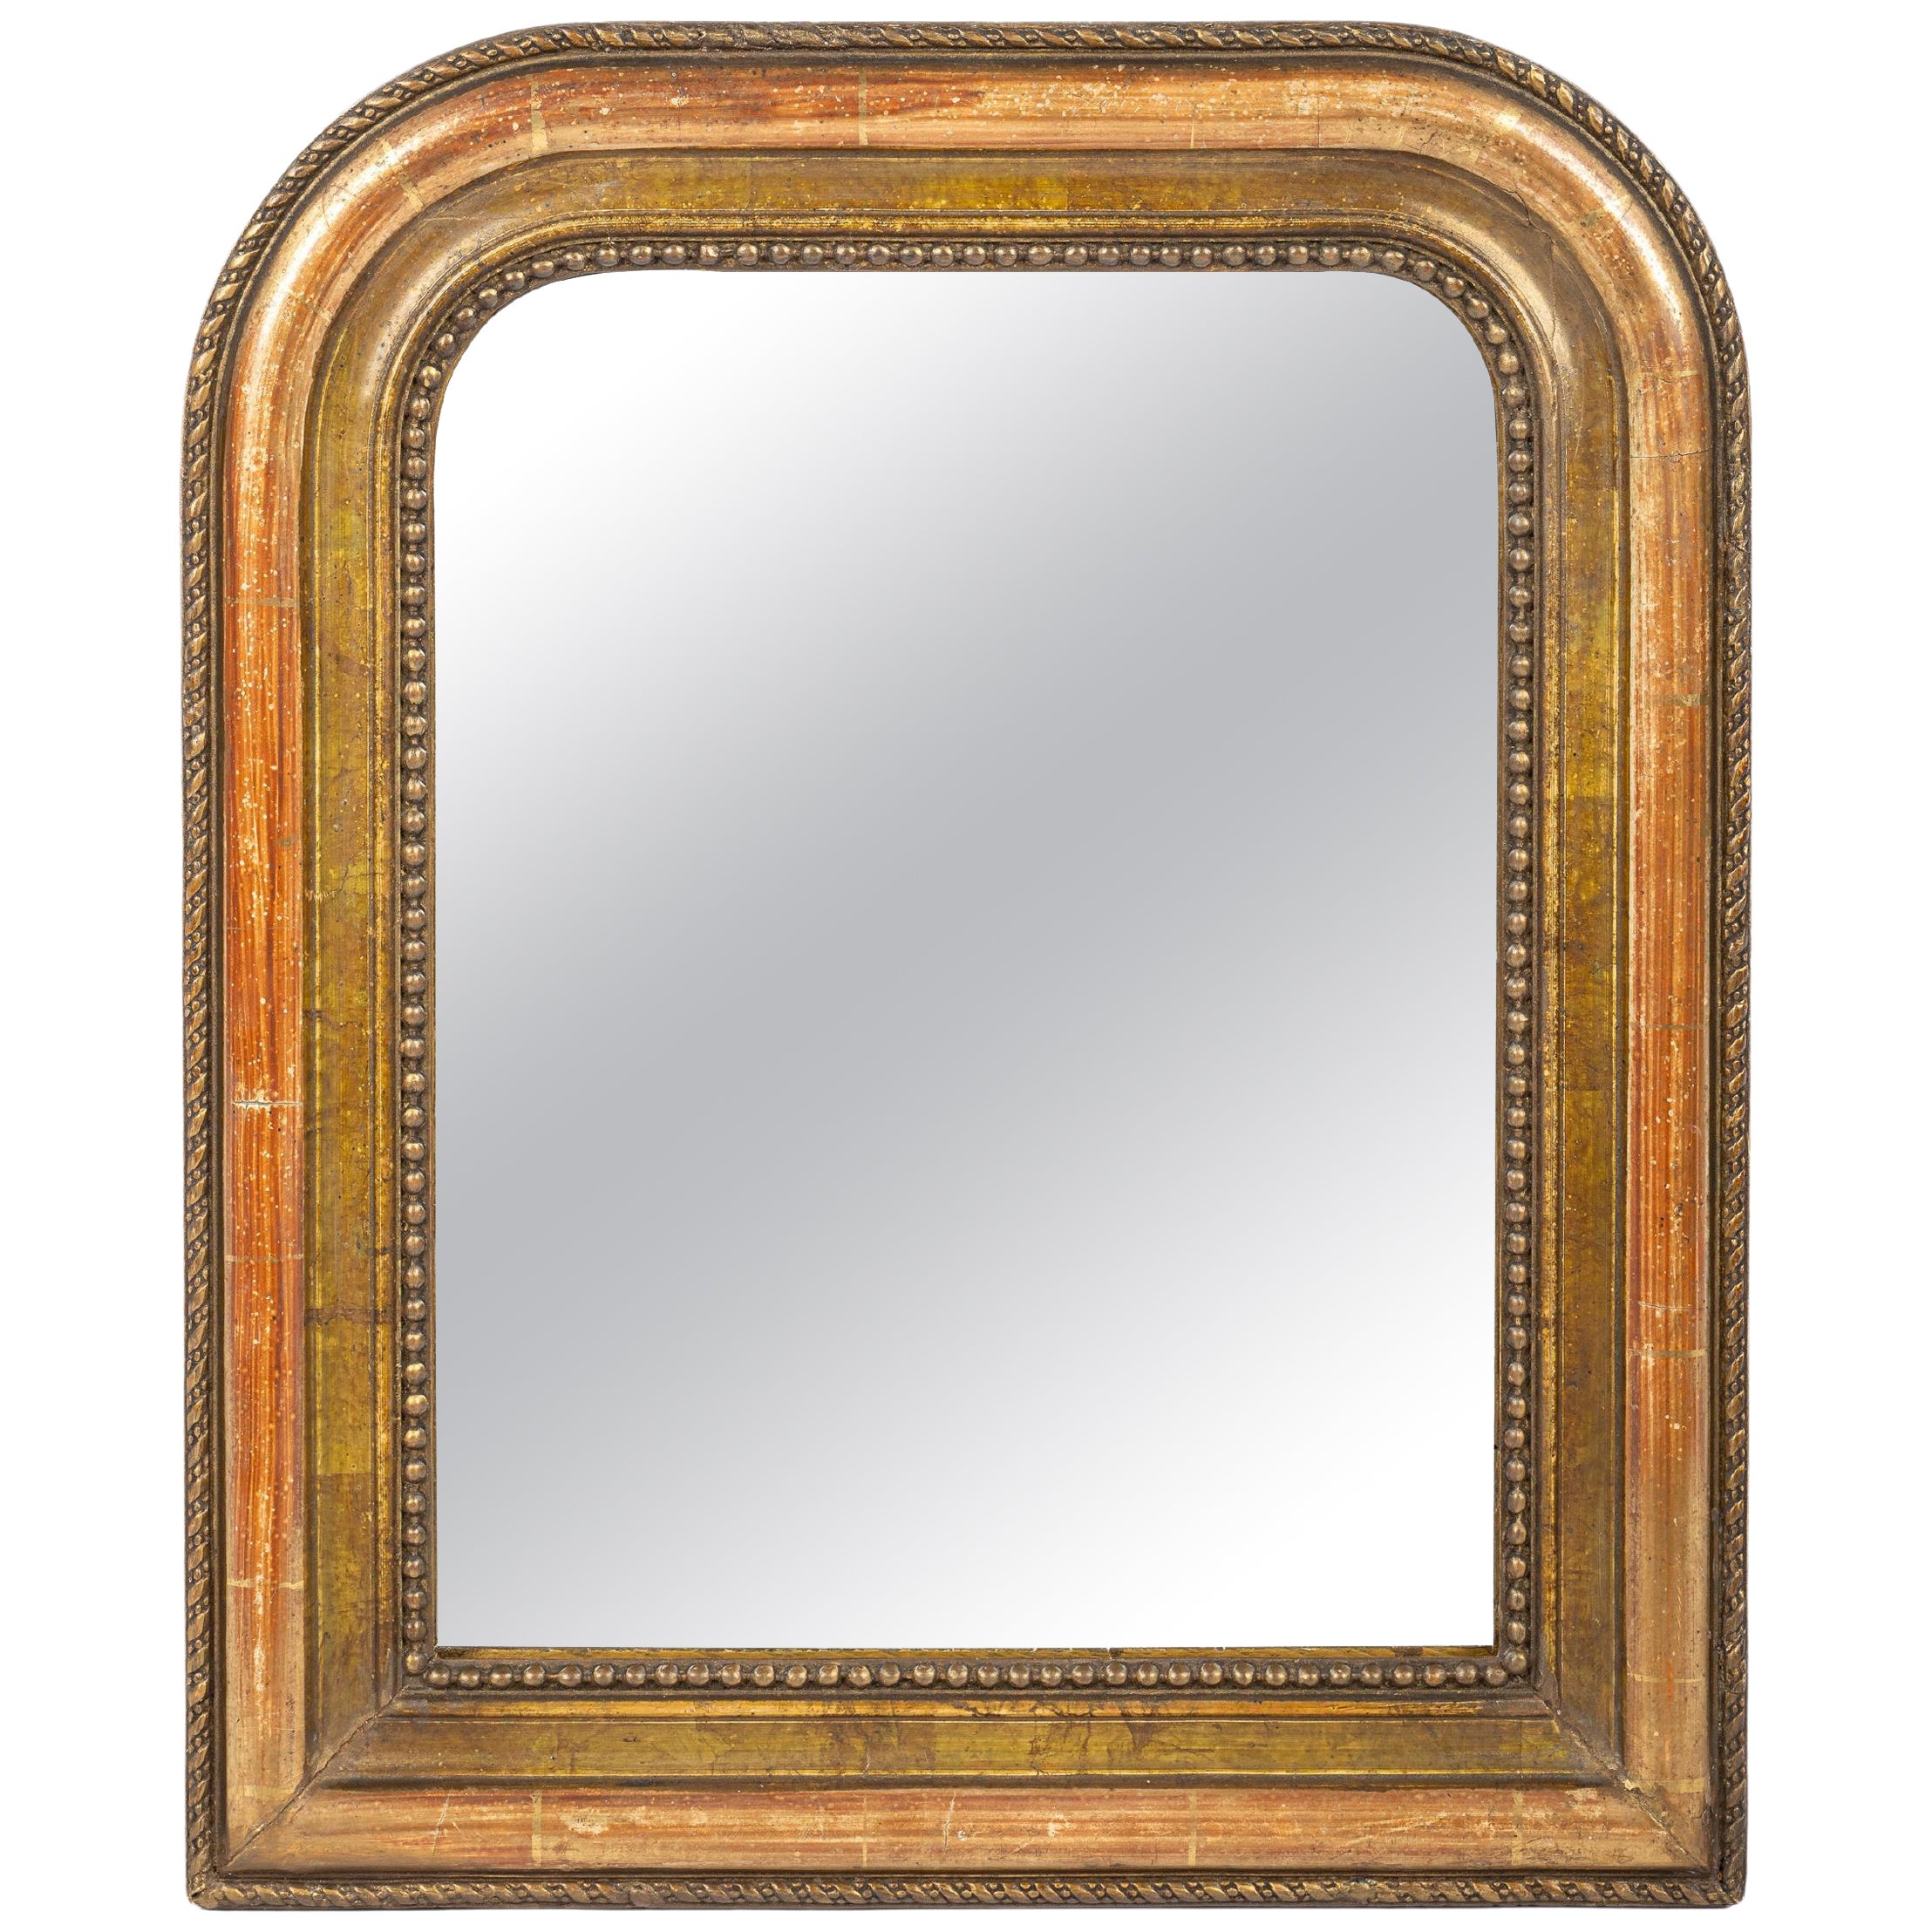 Antique 19th century Small French Worn Gold Leaf Gilt Louis Philippe Mirror For Sale